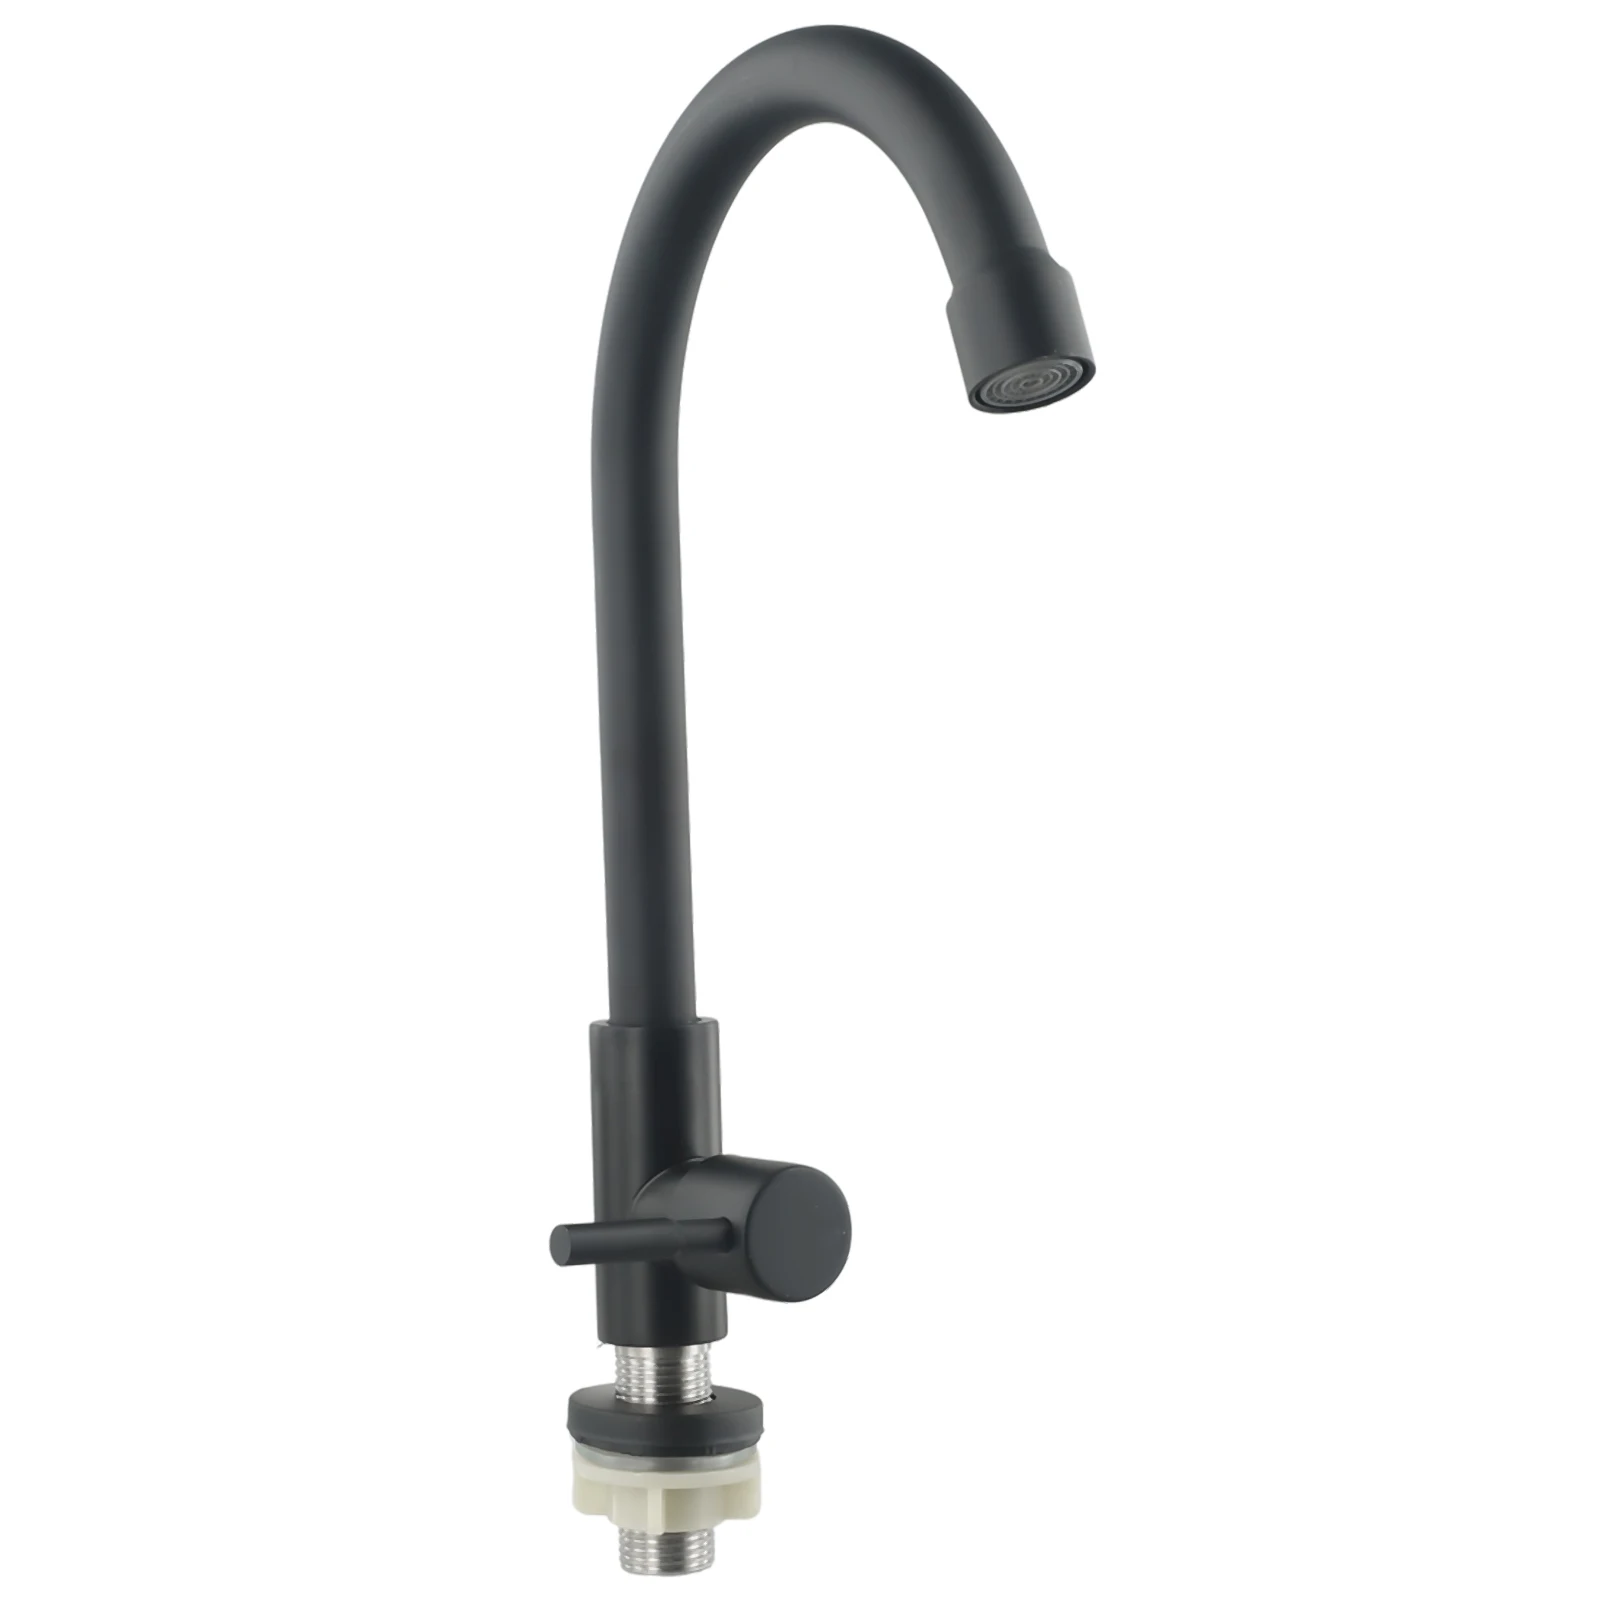 

Black Faucet Outlet Water Purifier Single Cold Water Single Handle Stainless Steel Energy-saving Bubbler Kitchen Bathroom Toilet